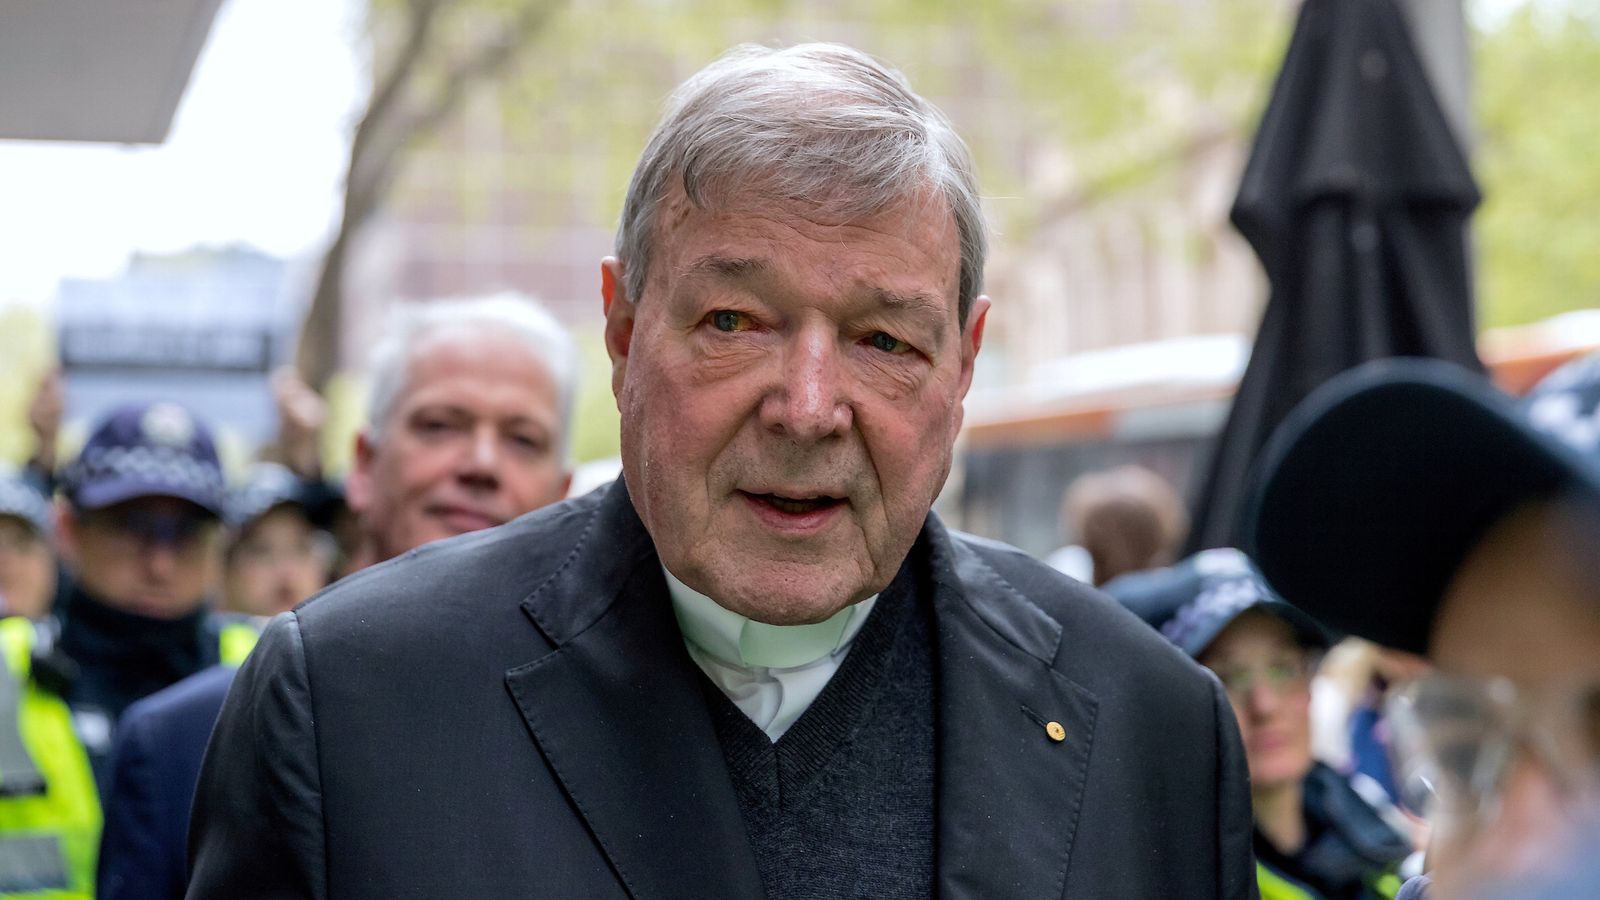 Cardinal George Pell, who was acquitted of child sexual abuse, has died aged 81 